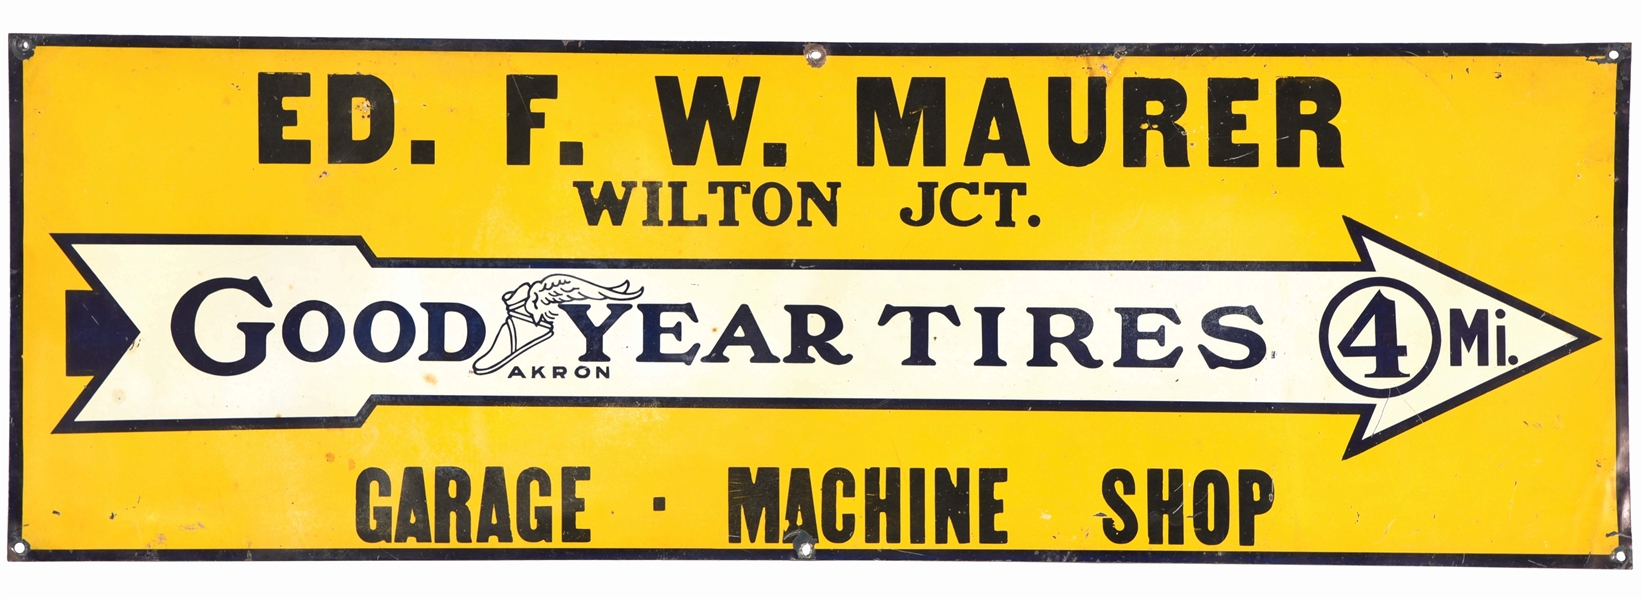 GOODYEAR TIRES TIN TACKER SIGN W/ WINGED FOOT & ARROW GRAPHIC. 